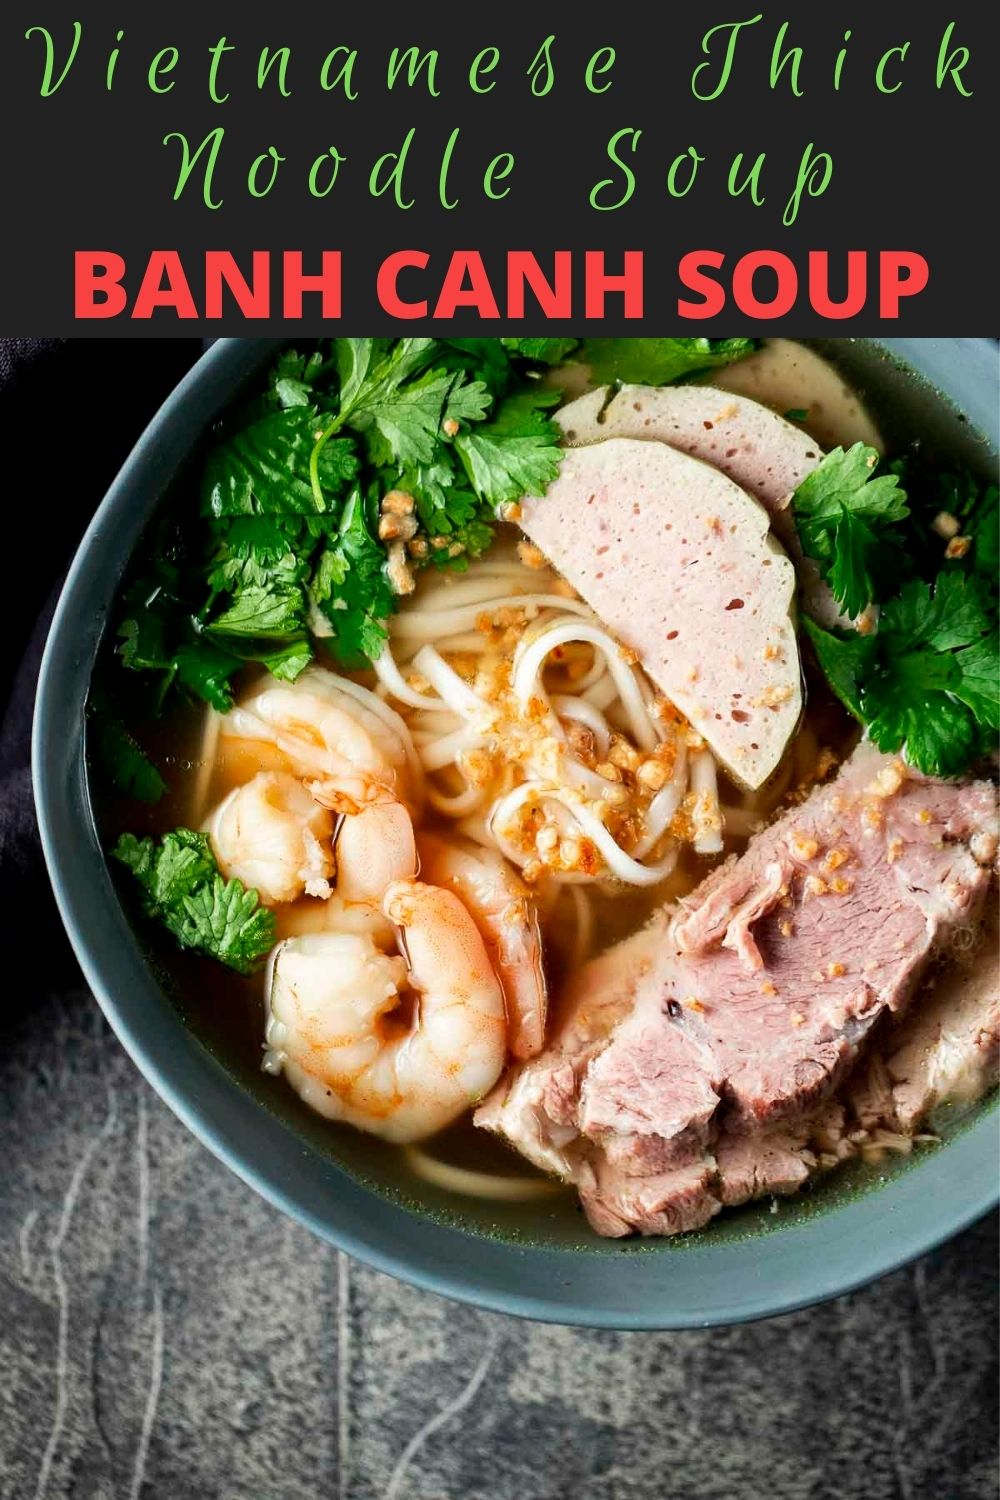 Banh Canh Soup (Vietnamese Thick Noodle Soup)